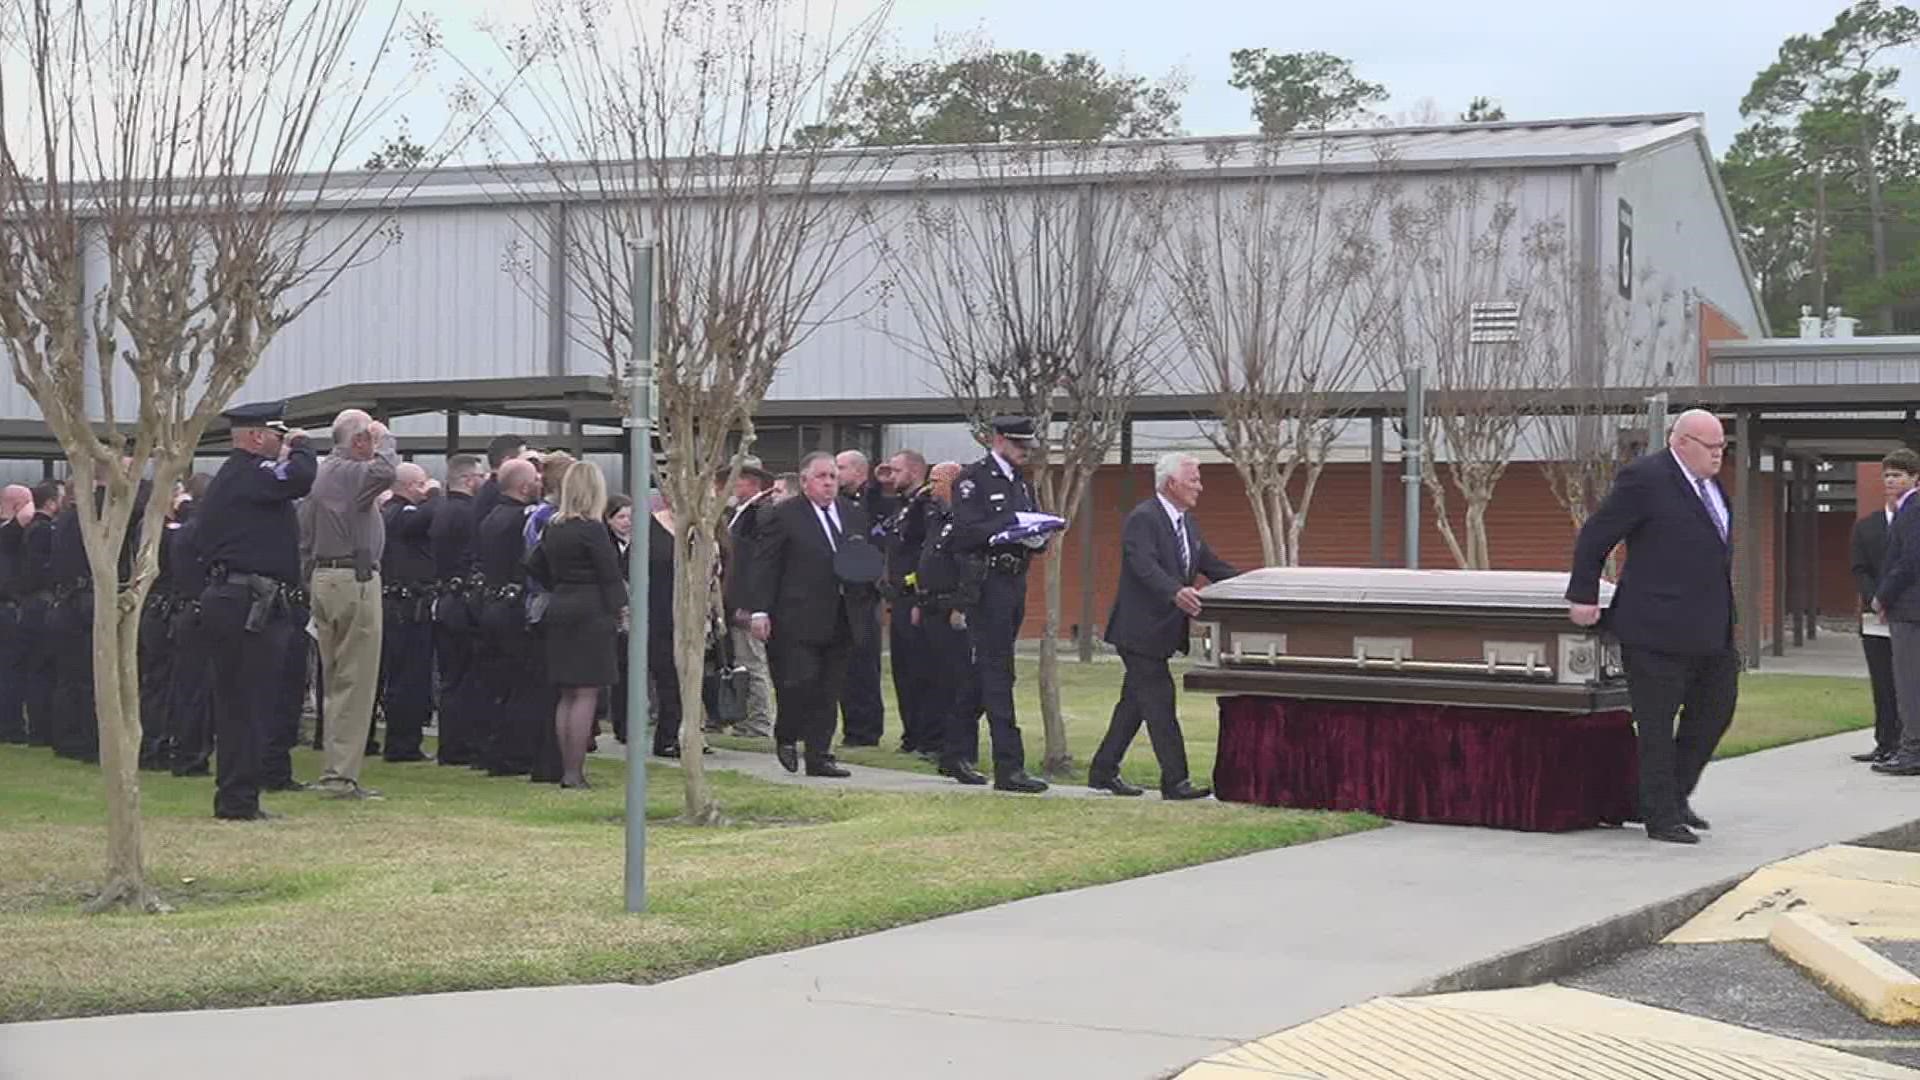 Friends, family, and co-workers all gathered to celebrate the life of Lt Joey Breaux and his 29 years of service to Lumberton Police.